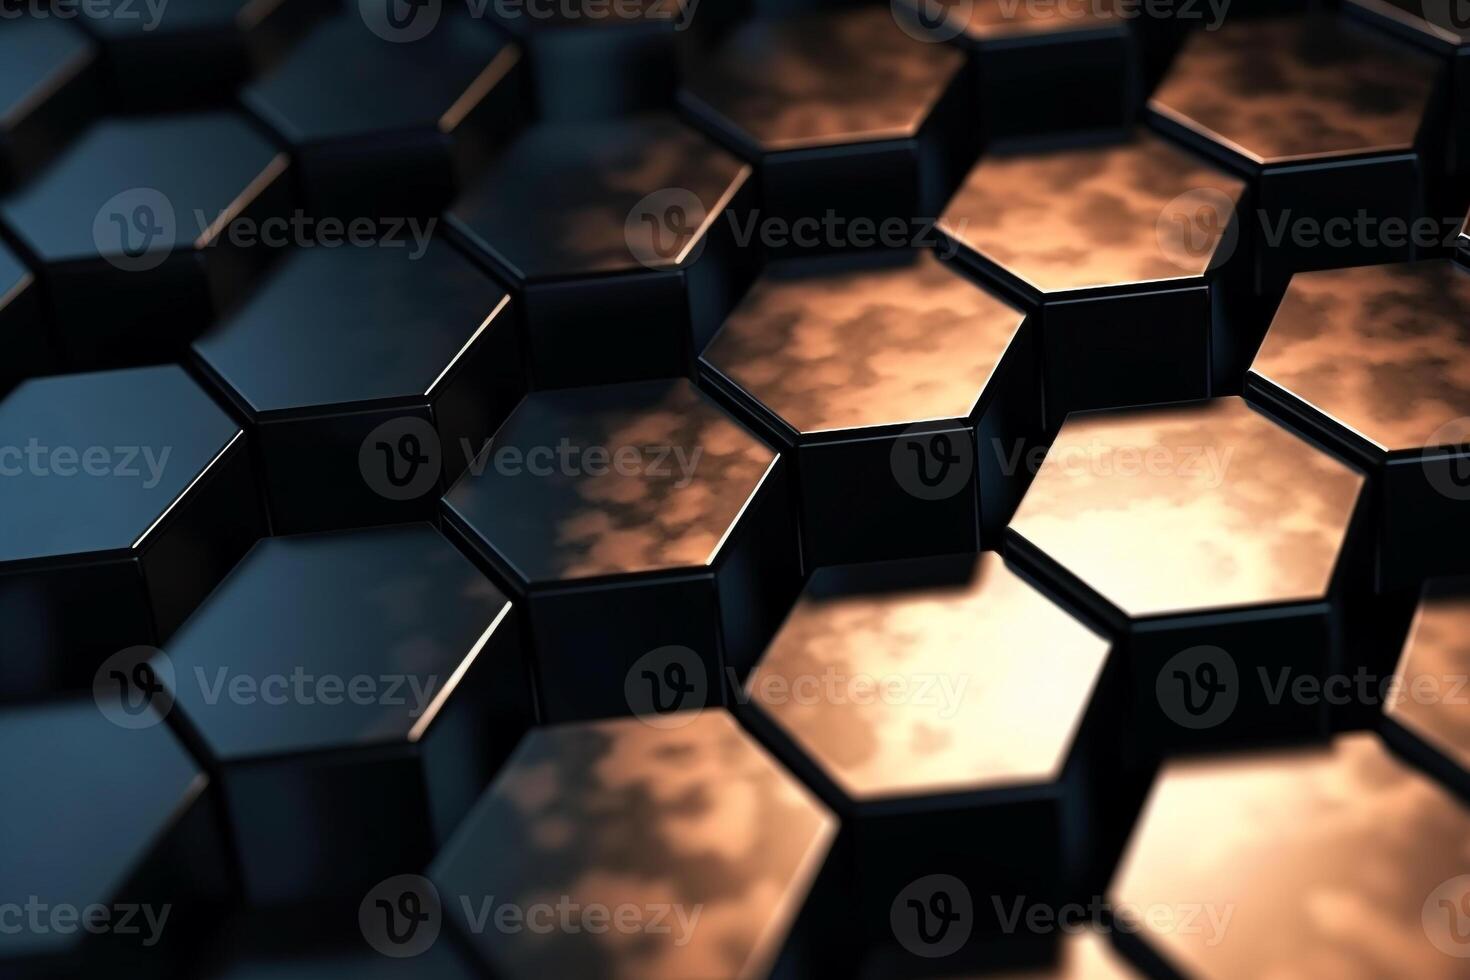 Abstract background hexagons glass pattern geometric crystals abstract photo